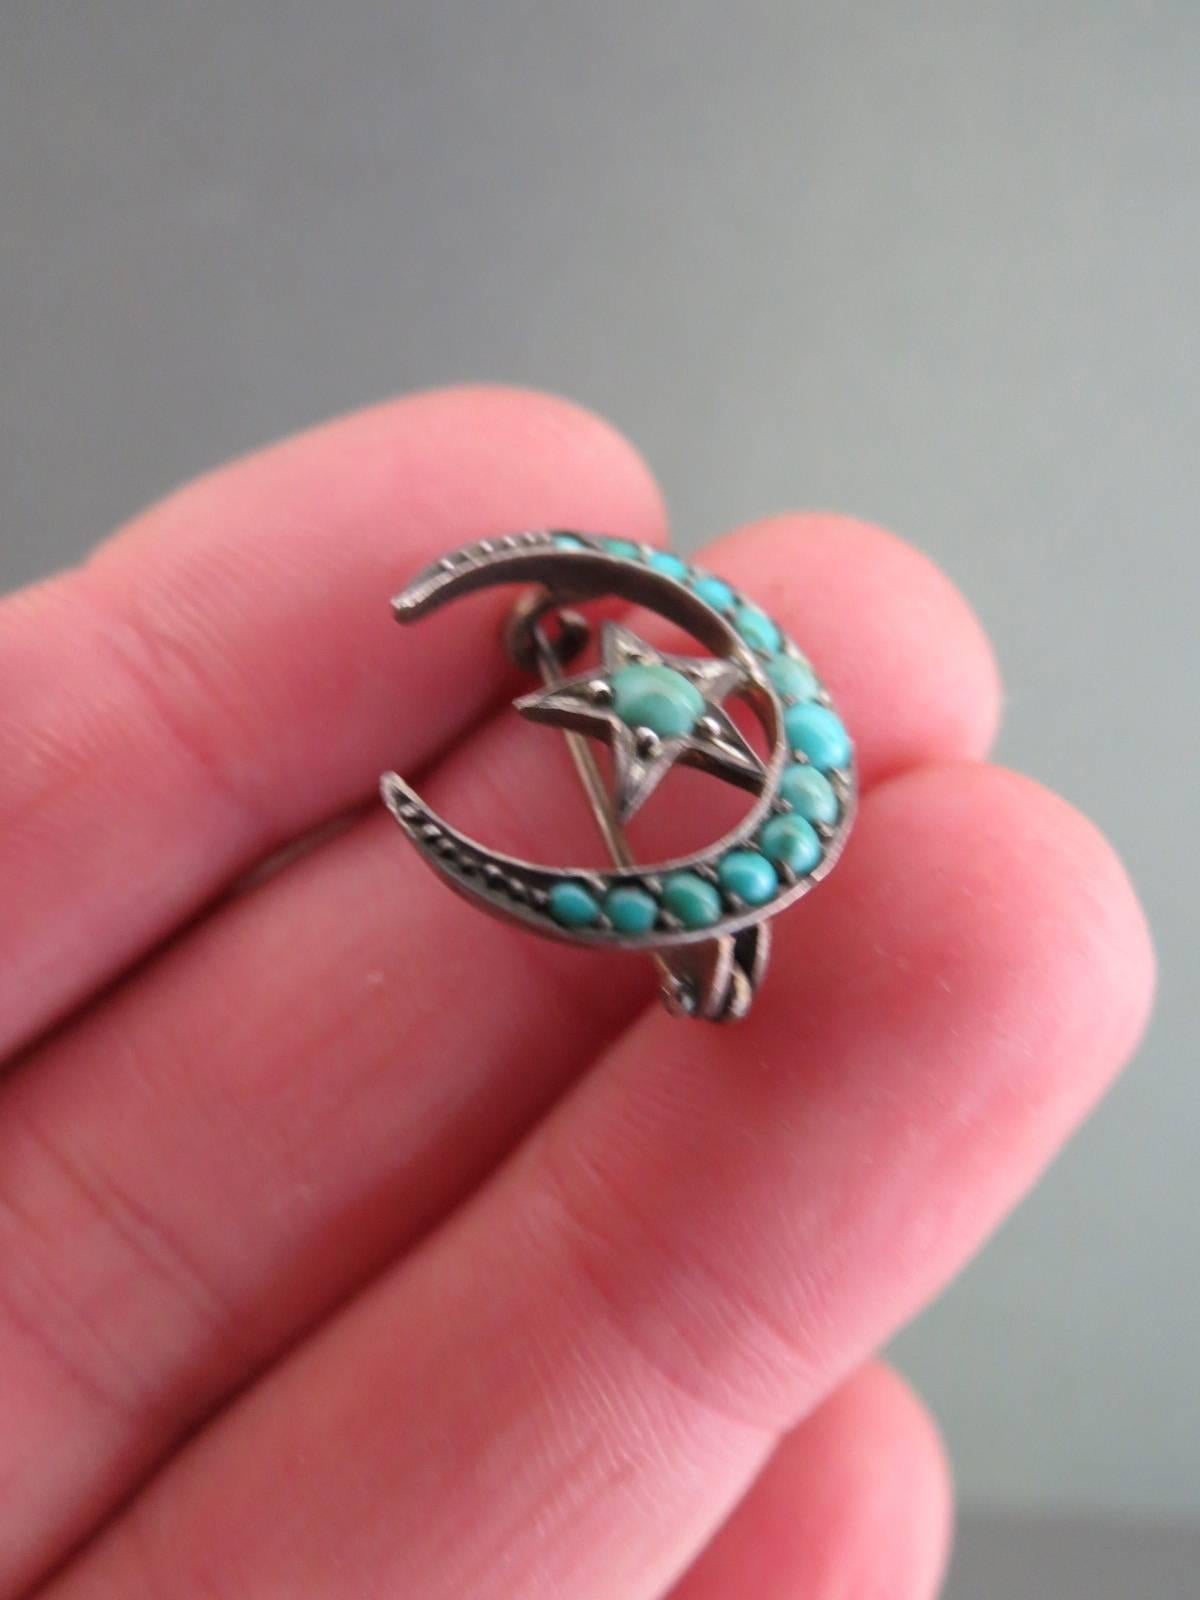 Vintage Victorian Sterling Silver Pave Turquoise Crescent Moon Star Brooch.
Item Specifics
Height: 1.7cm (approx 0.50